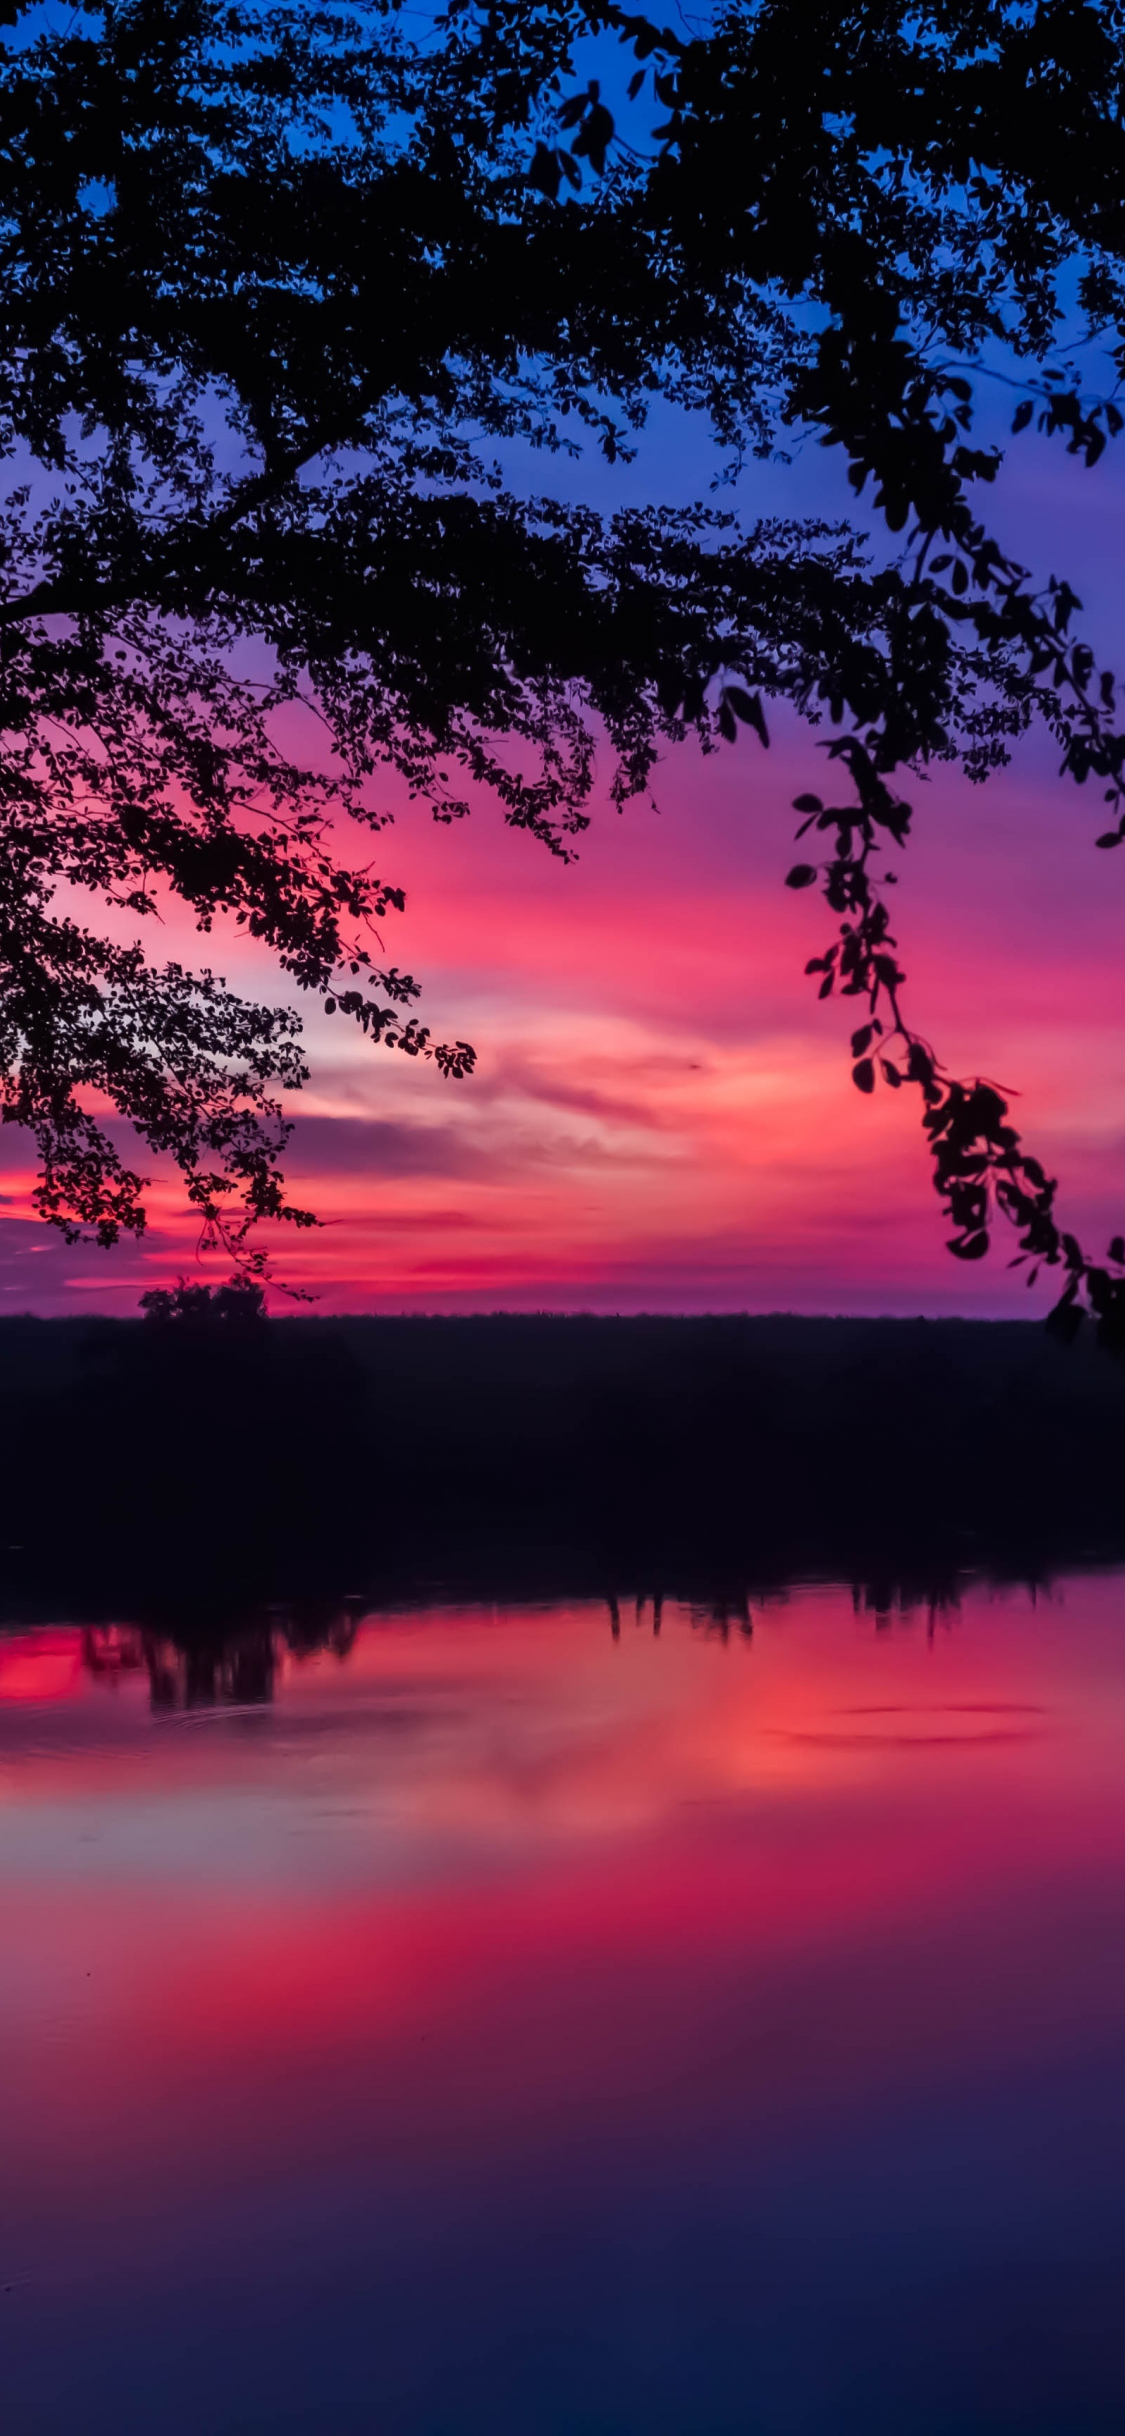 Download 1125x2436 Wallpaper Twilight Sunset Colorful Sky Lake